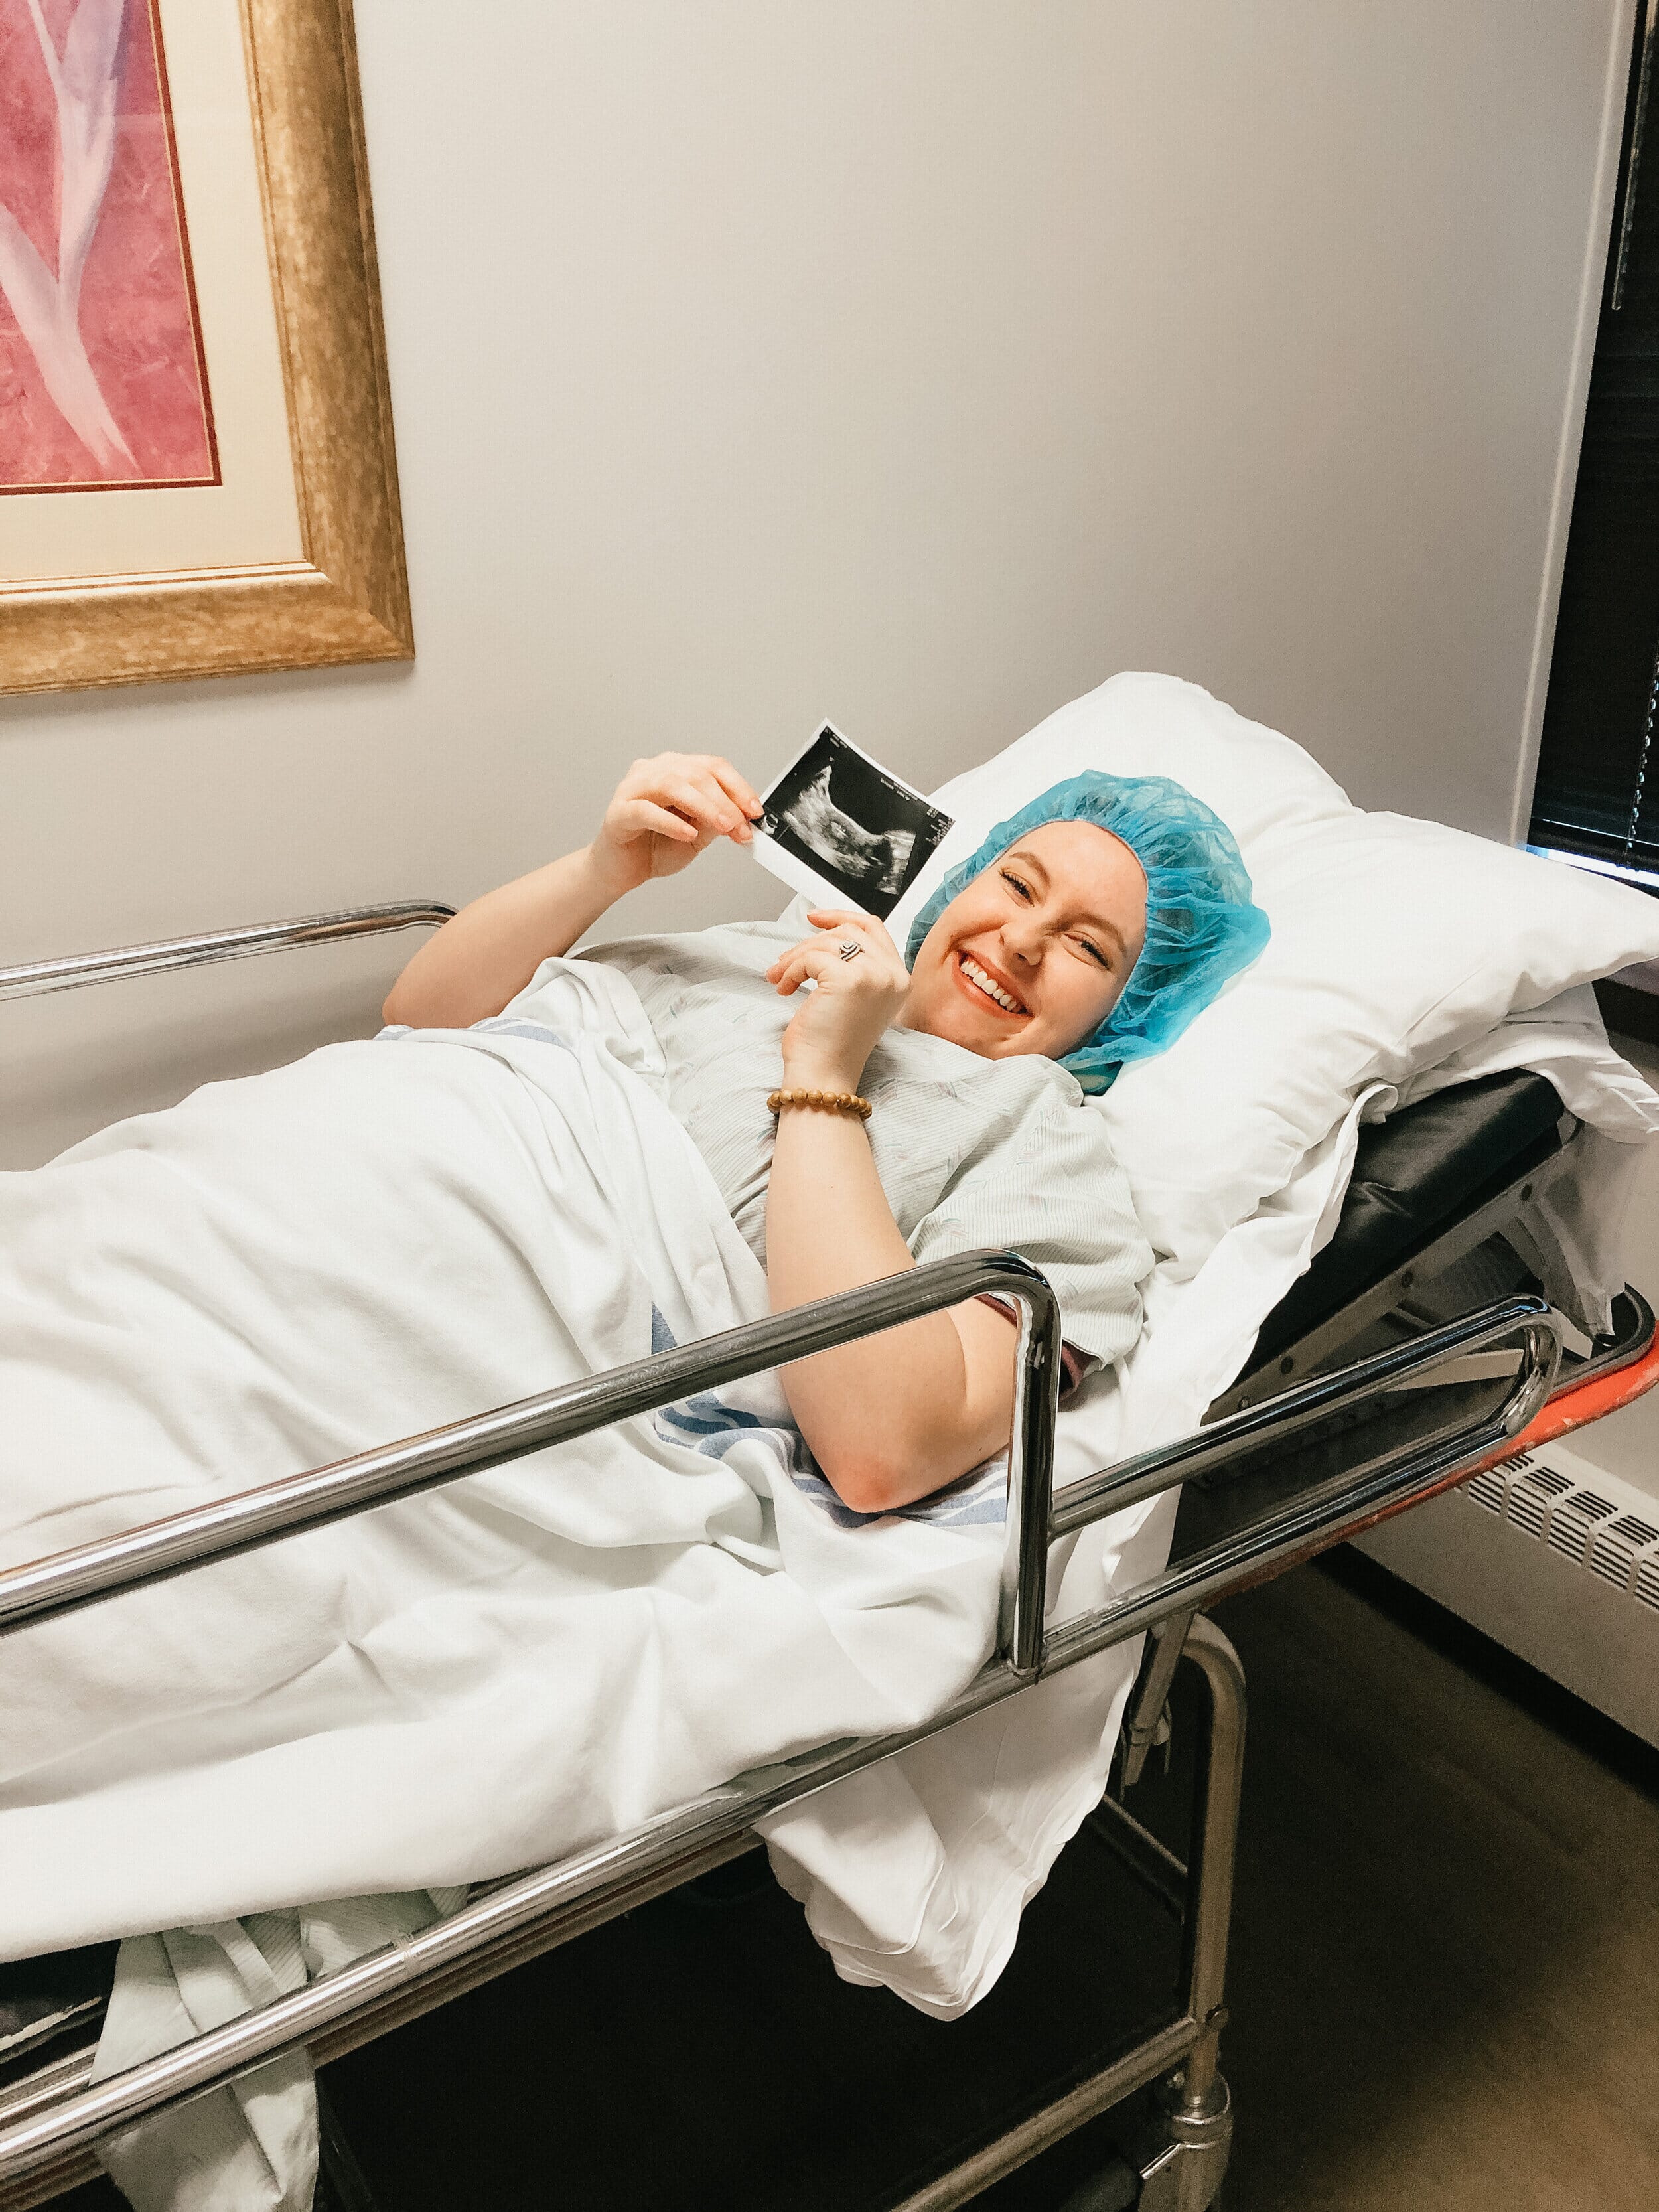 kayla kohl in the fertility clinic holding an ultrasound picture